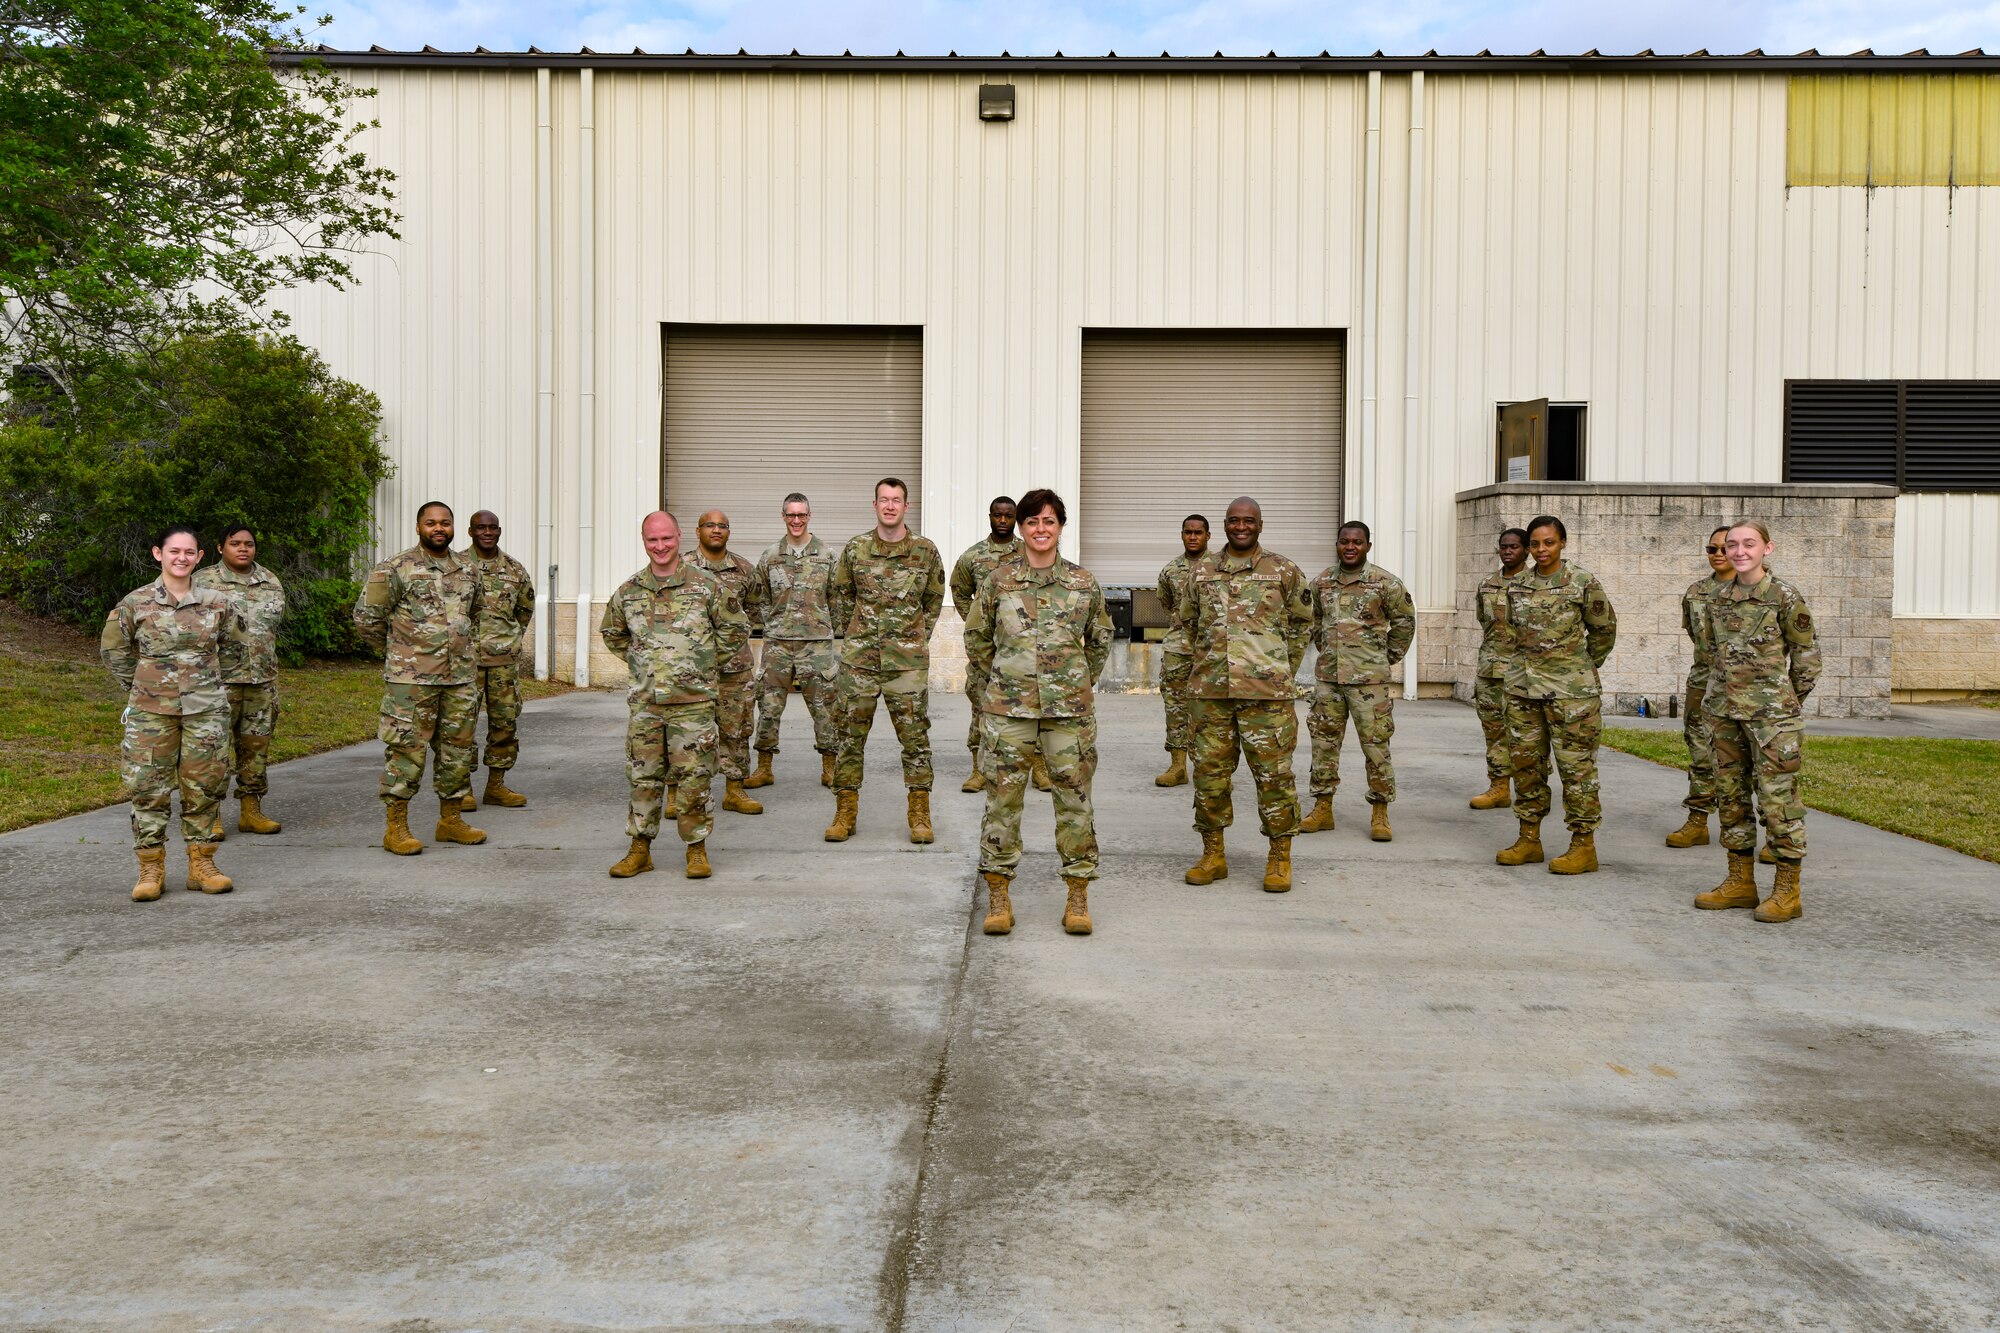 Members of the 910th LRS traveled to JB Charleston to conduct training on an active duty installation to ensure they remain combat-ready.